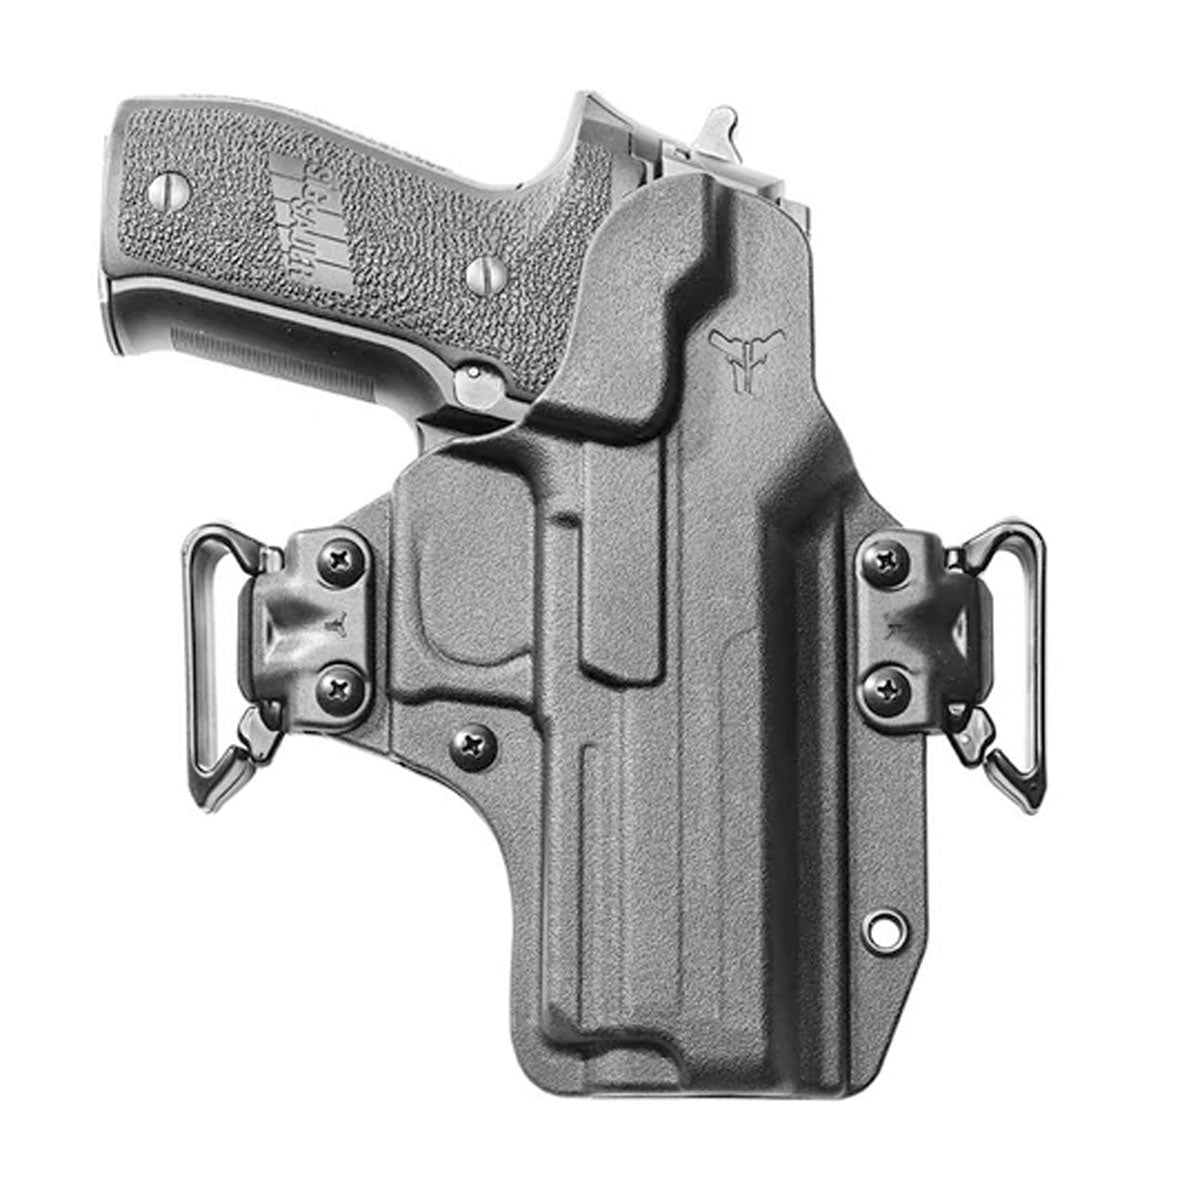 Blade-Tech Total Eclipse 2.0 Modular Holster Holsters Blade-Tech Holsters Sig - P220 / P226 Tactical Gear Supplier Tactical Distributors Australia